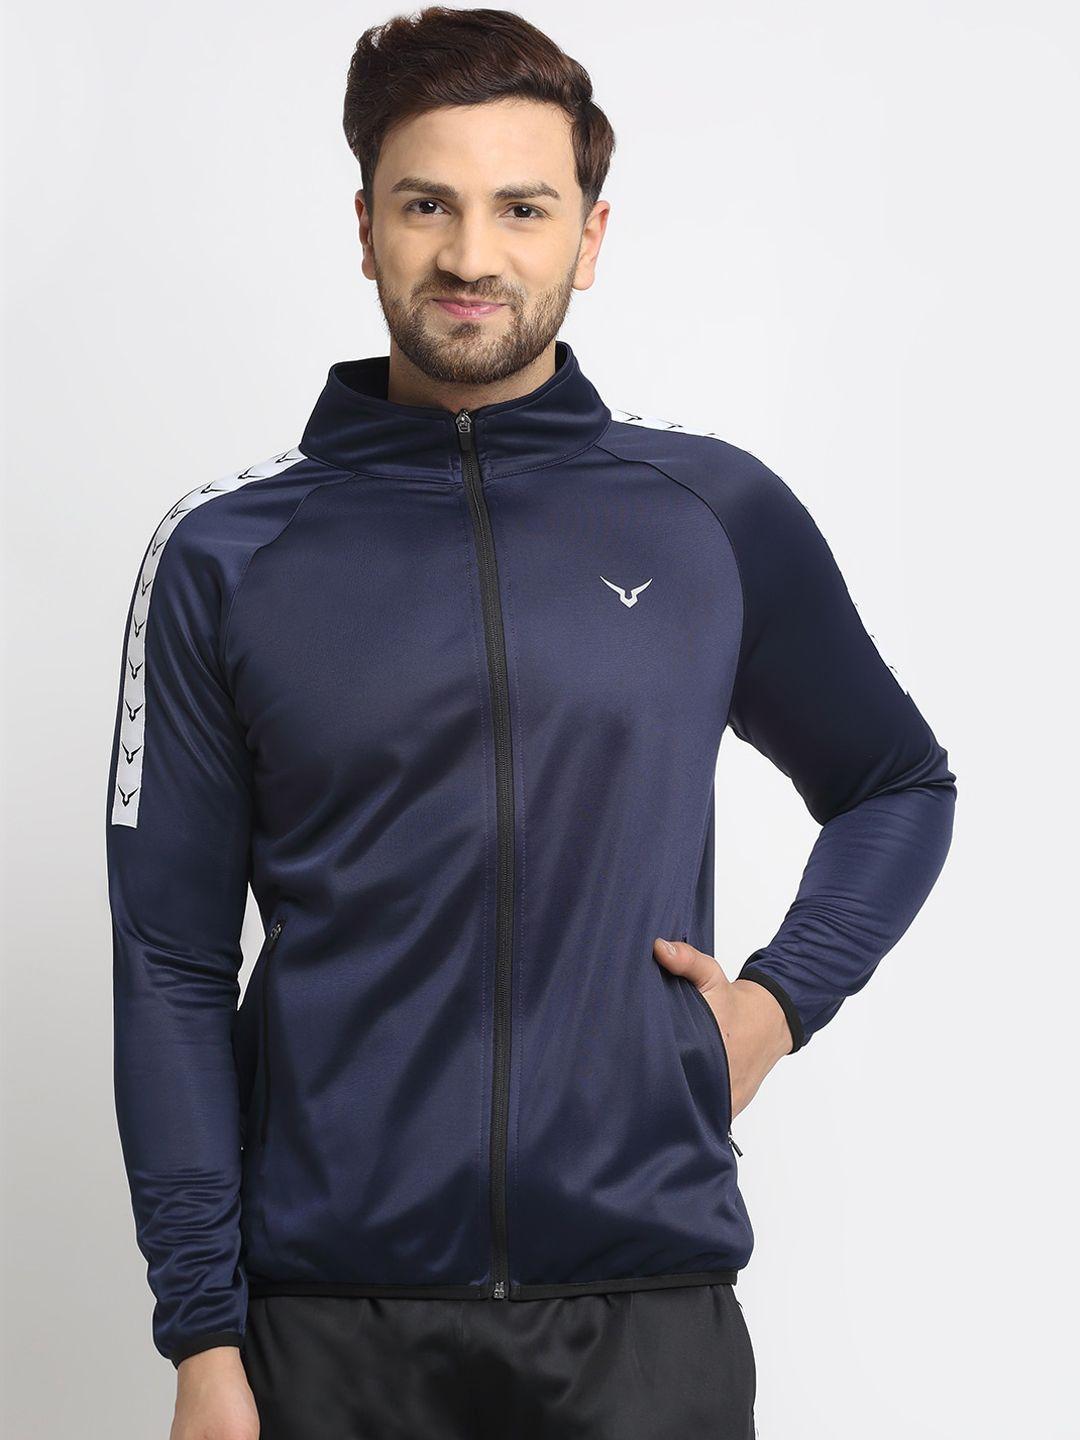 invincible men navy blue lightweight rapid dry training or gym sporty jacket